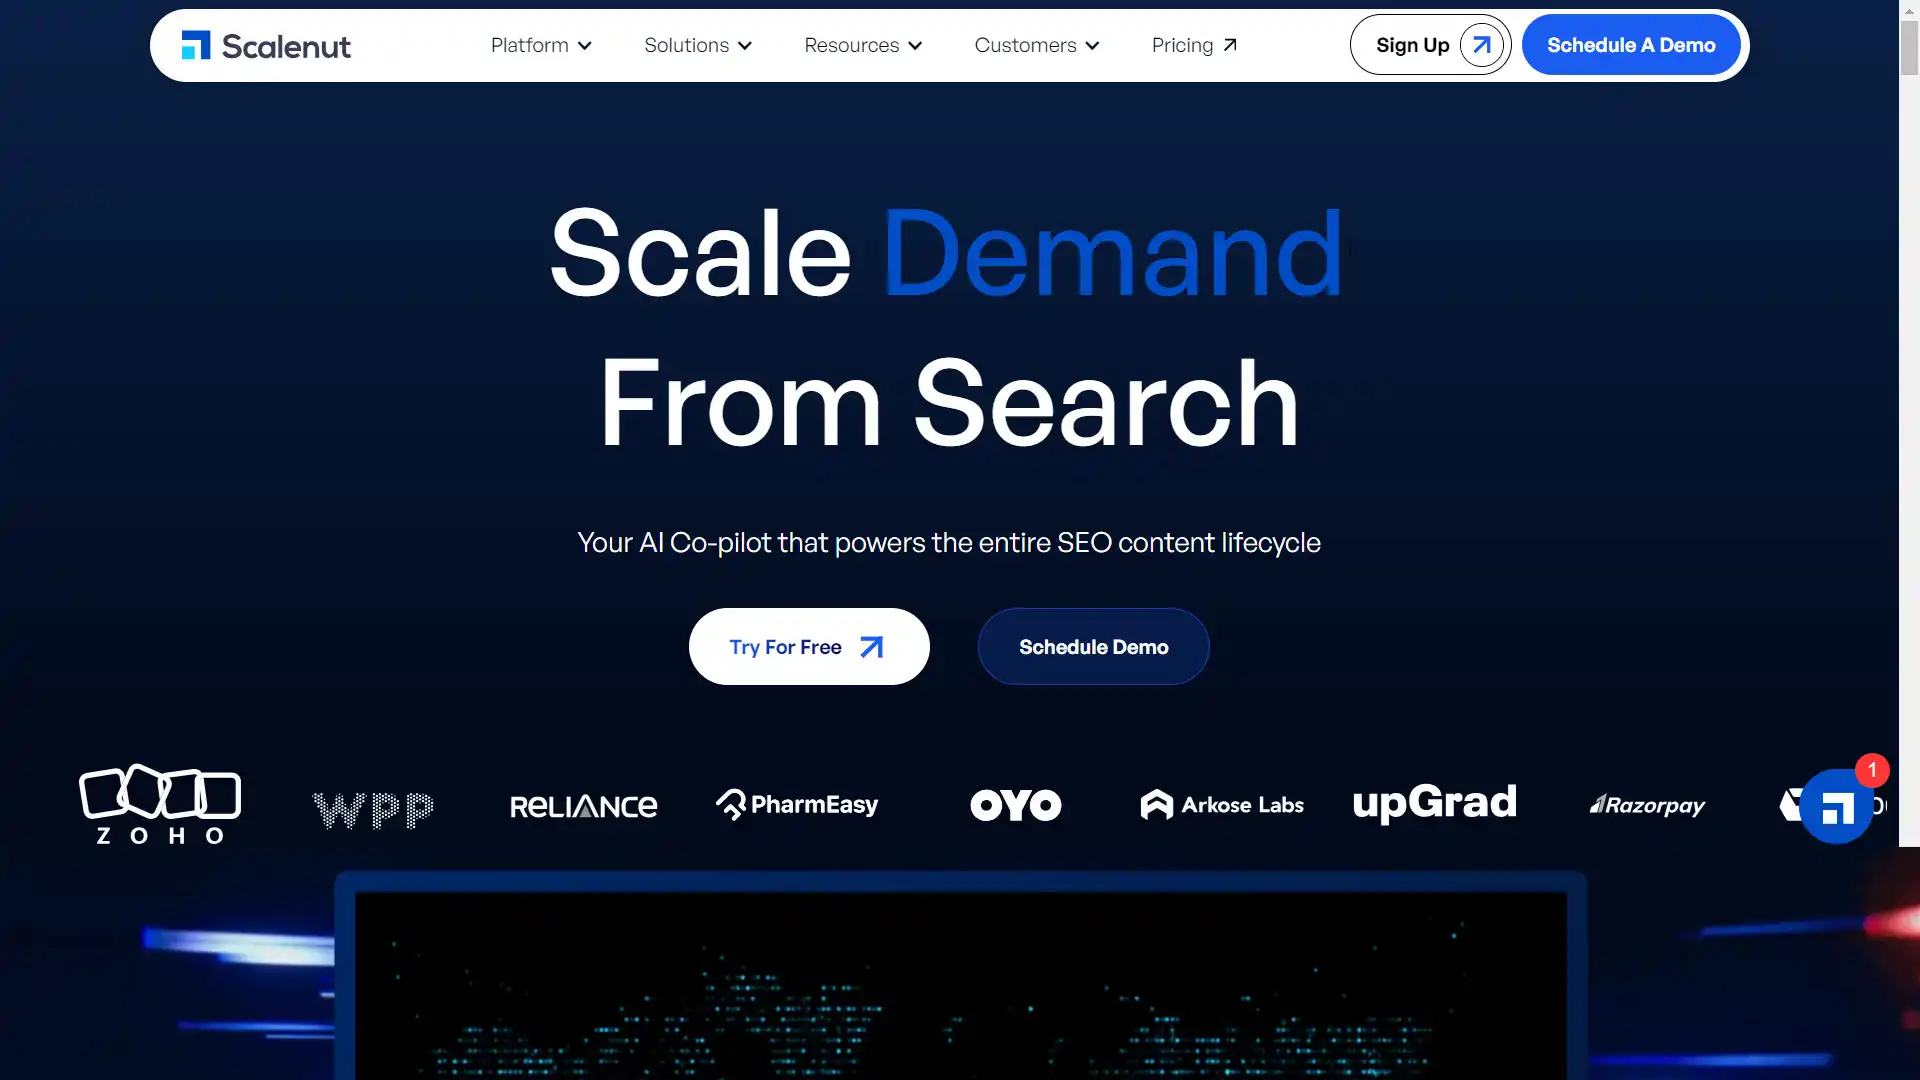 Scalenut: The Ultimate AI-Powered SEO and Content Marketing Platform